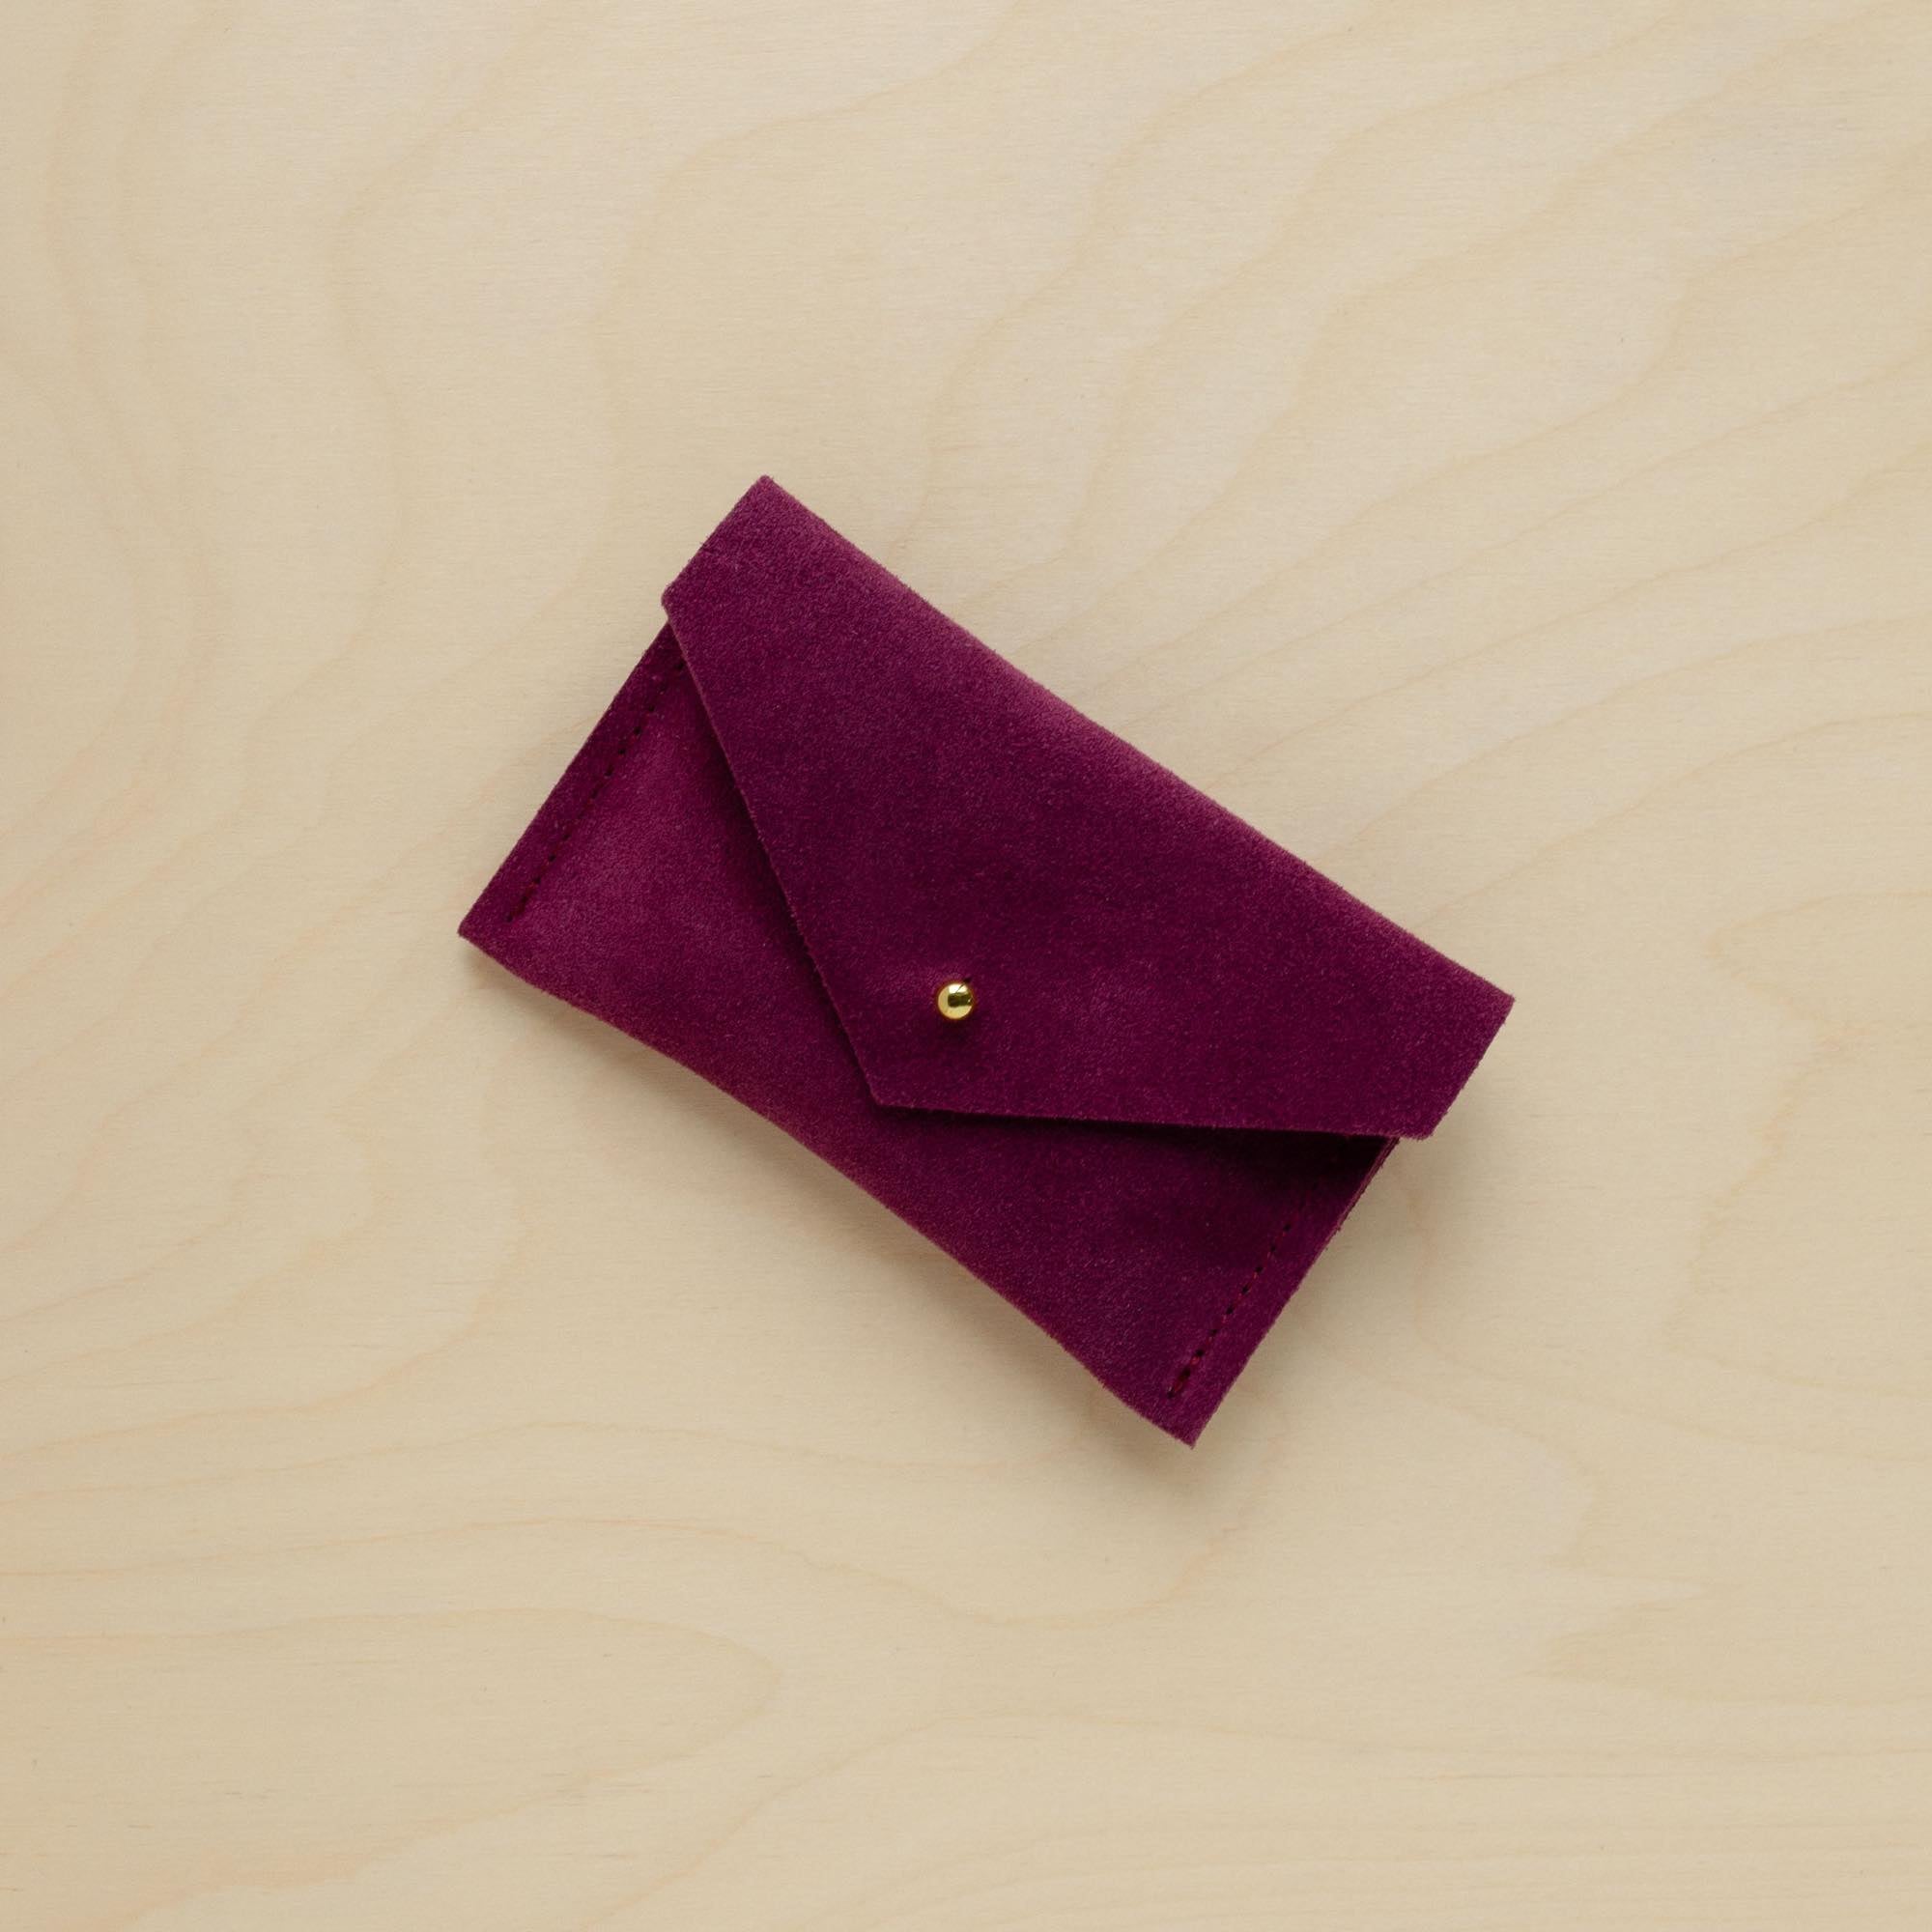 A suede Small Notions Pouch in Plum Purple. Complete with a stud for secure closing.